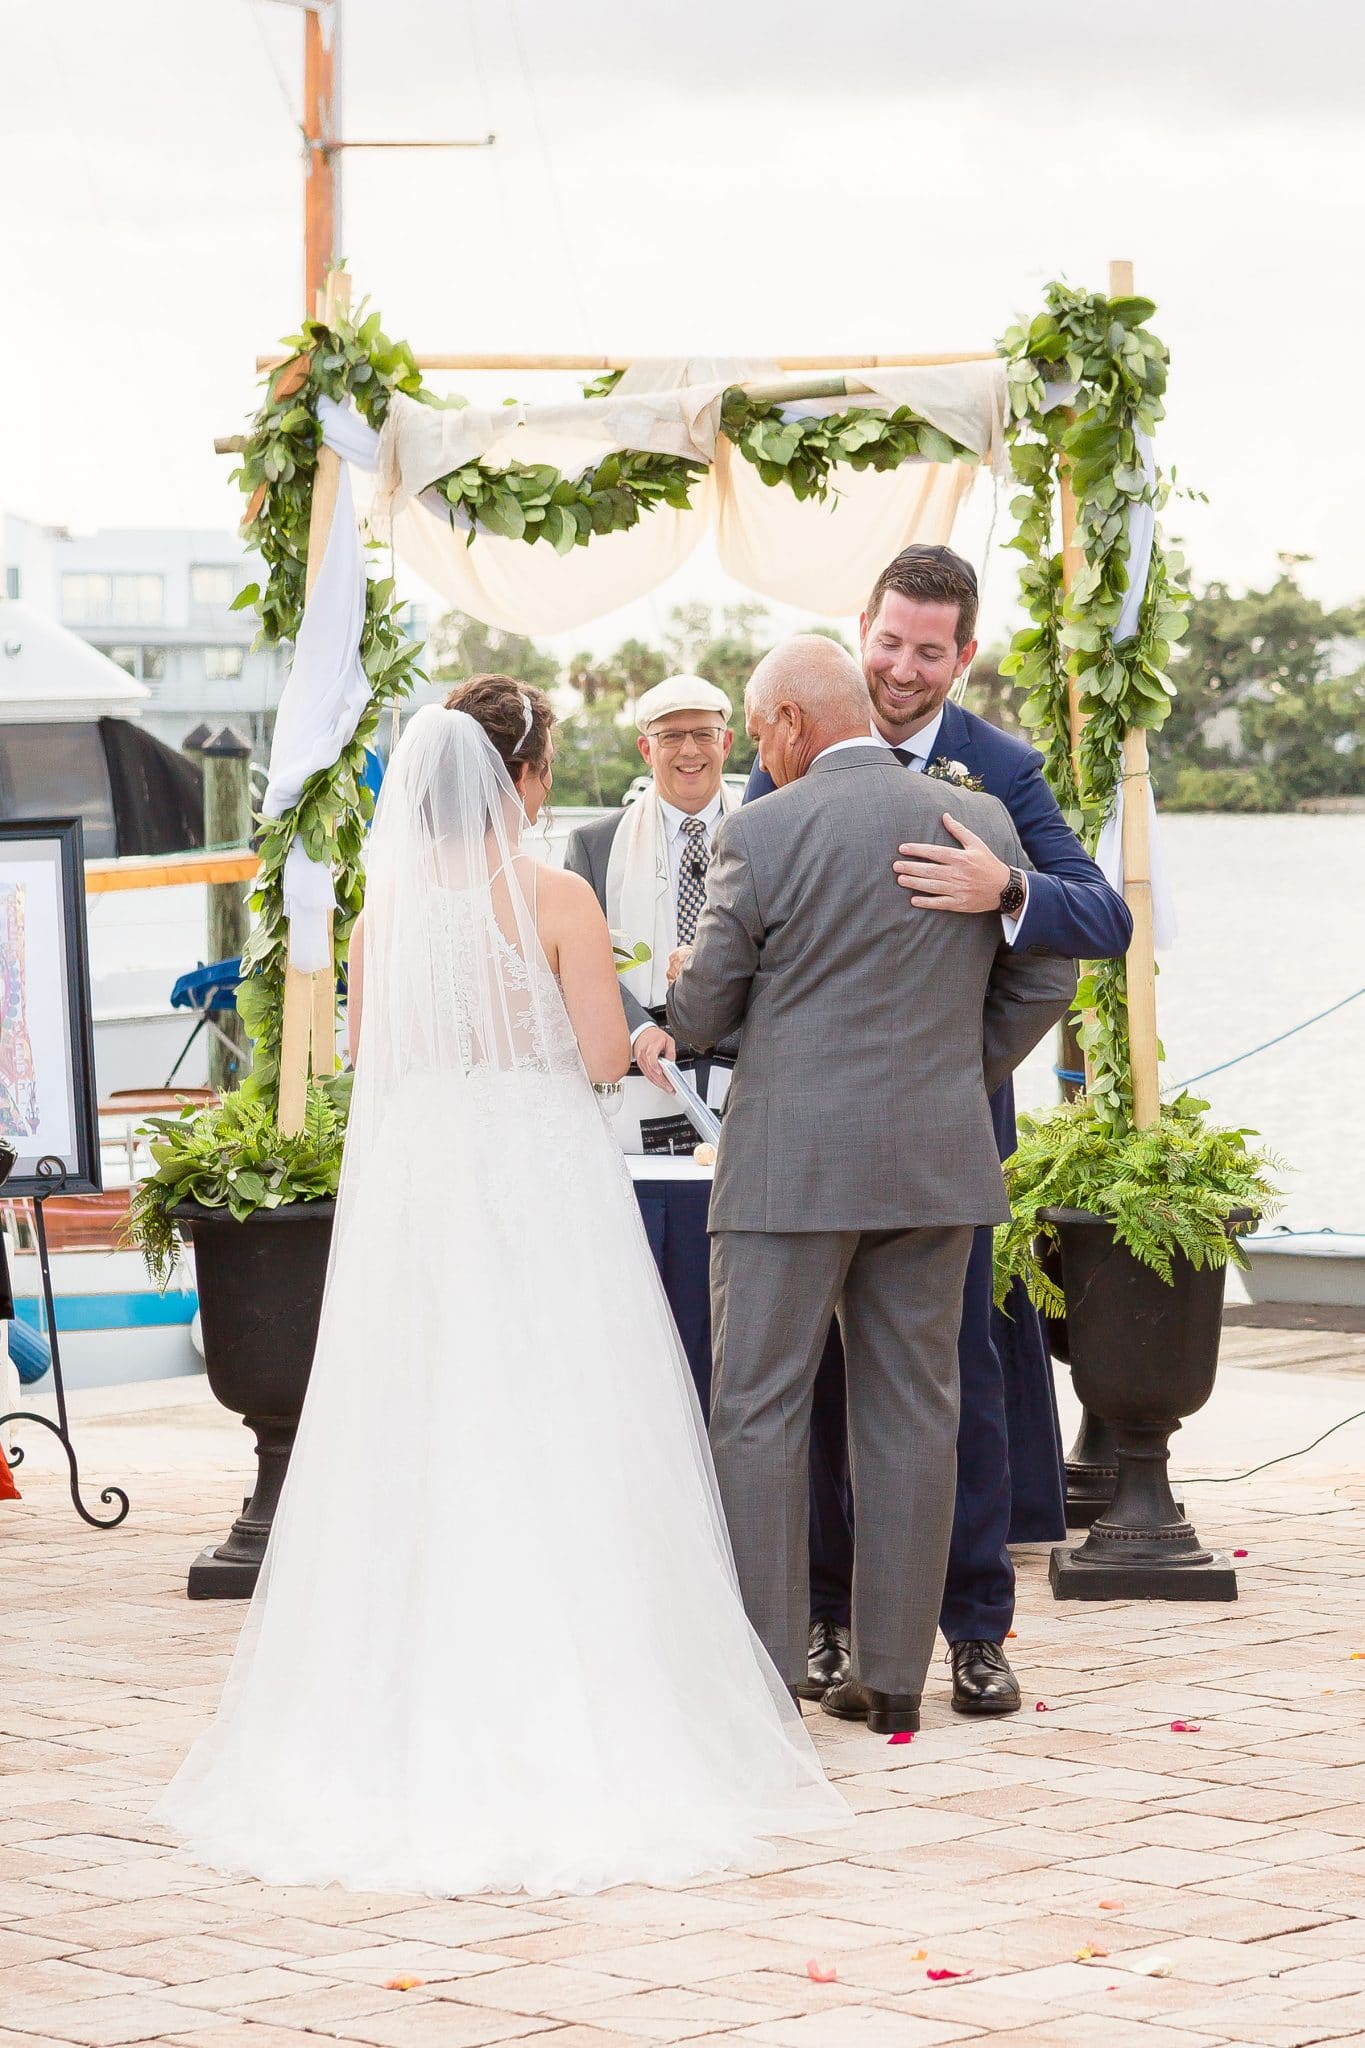 things go wrong at a wedding - father of the bride hugging groom at alter